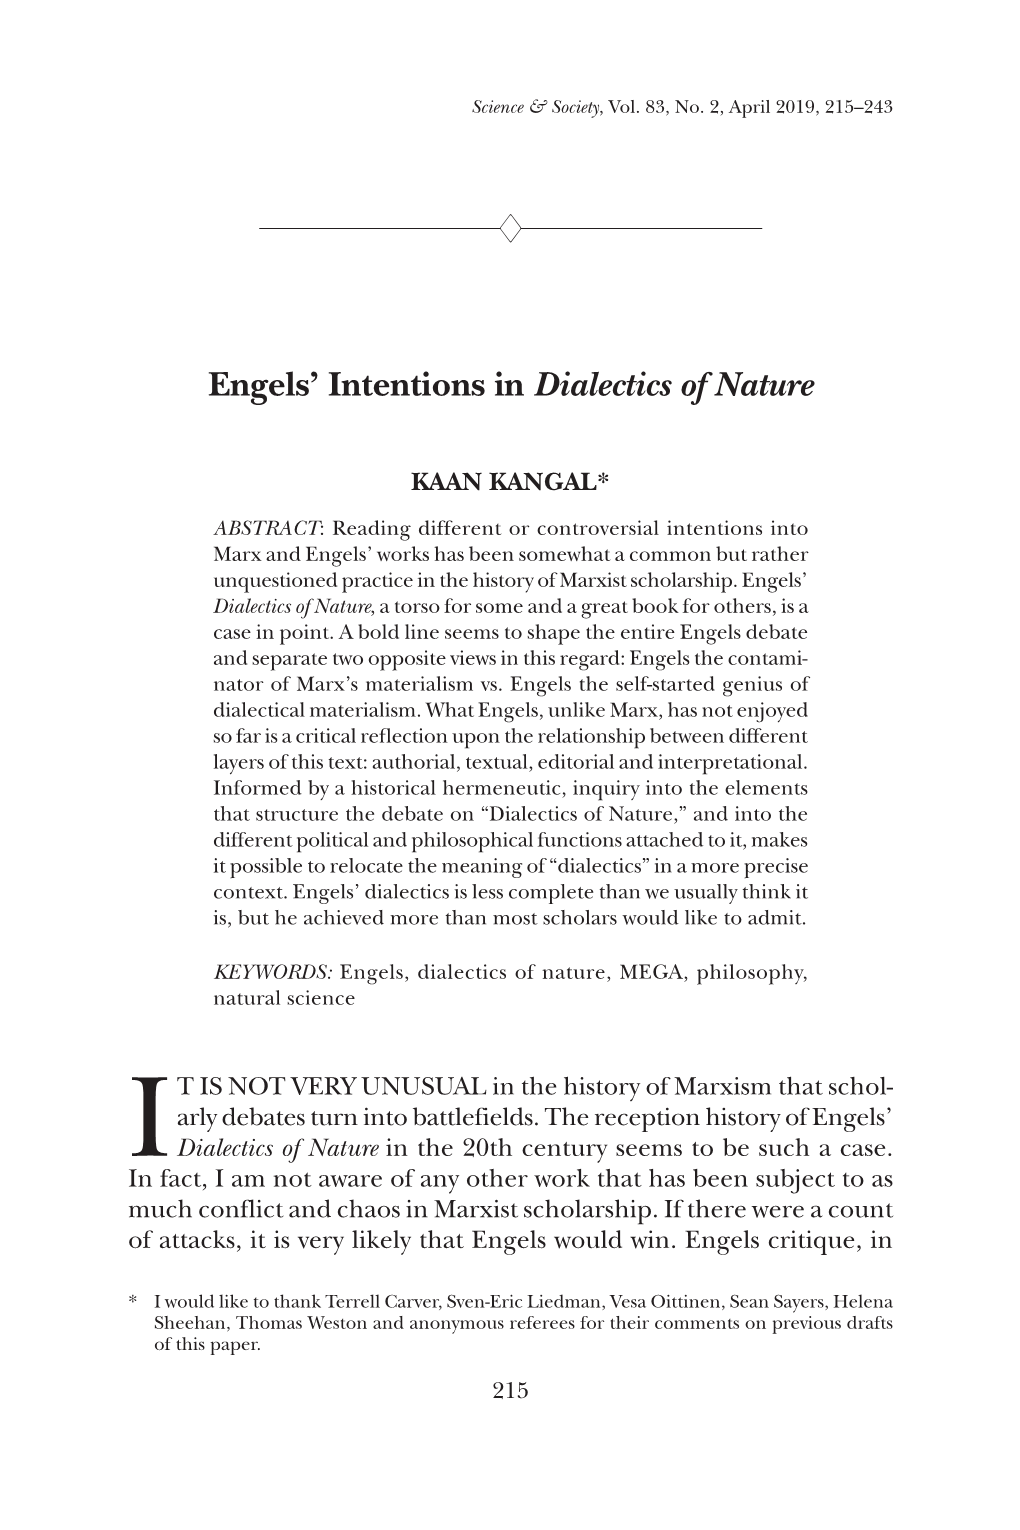 Engels' Intentions in Dialectics of Nature